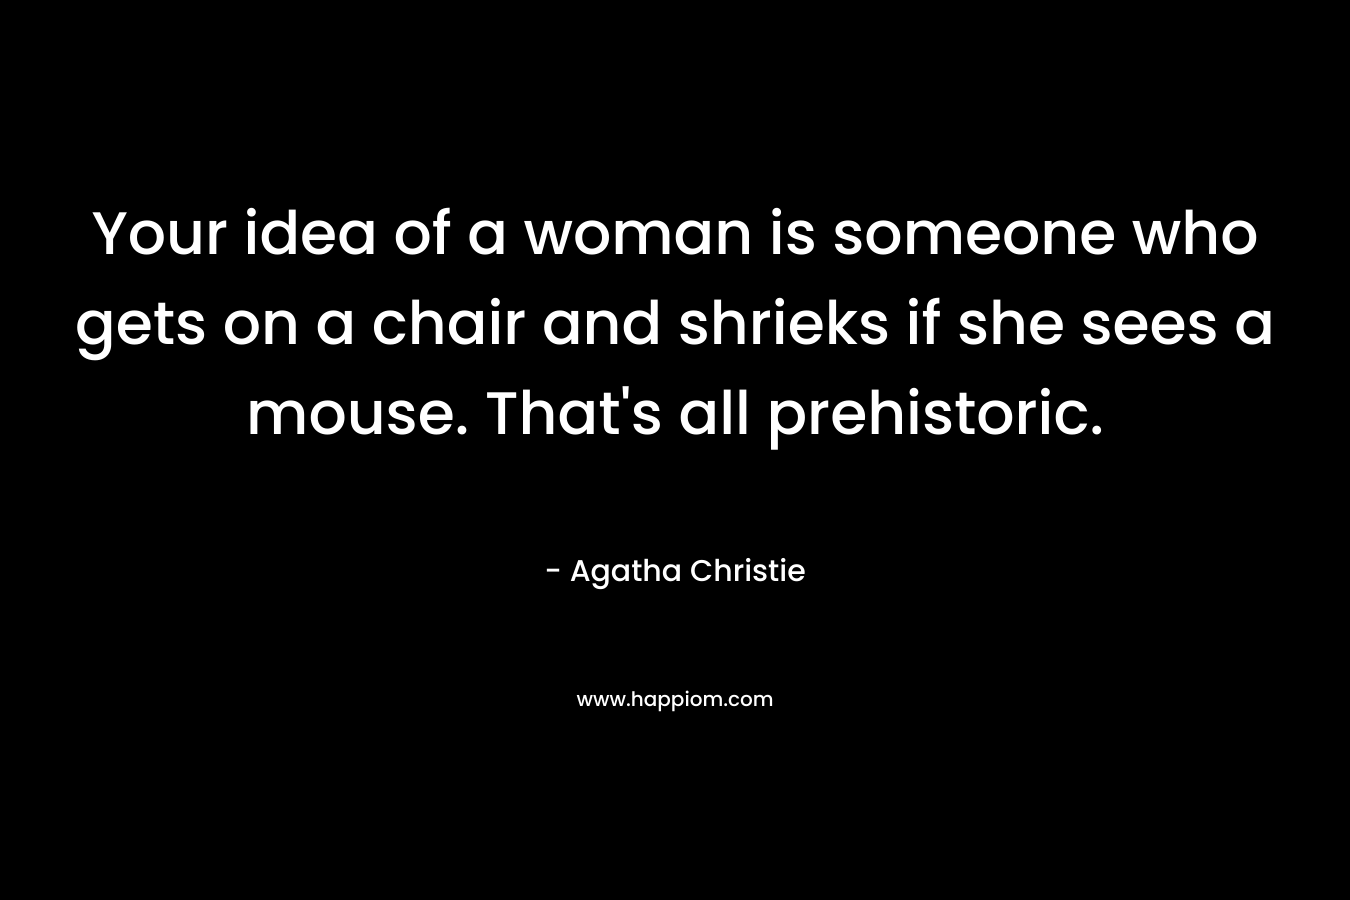 Your idea of a woman is someone who gets on a chair and shrieks if she sees a mouse. That's all prehistoric.